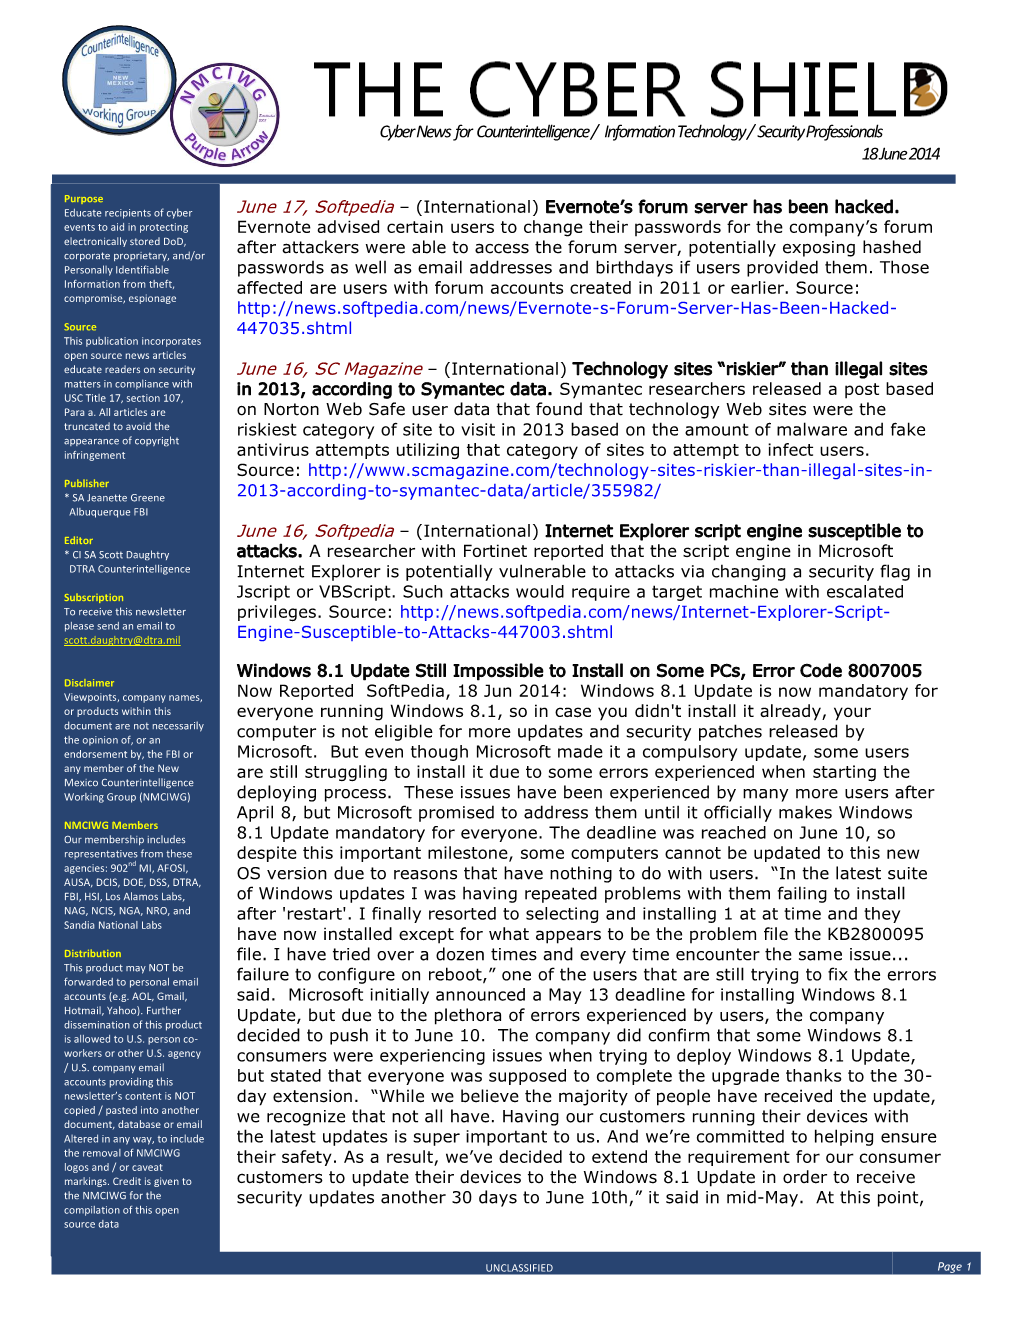 Cyber News for Counterintelligence / Information Technology / Security Professionals 18 June 2014